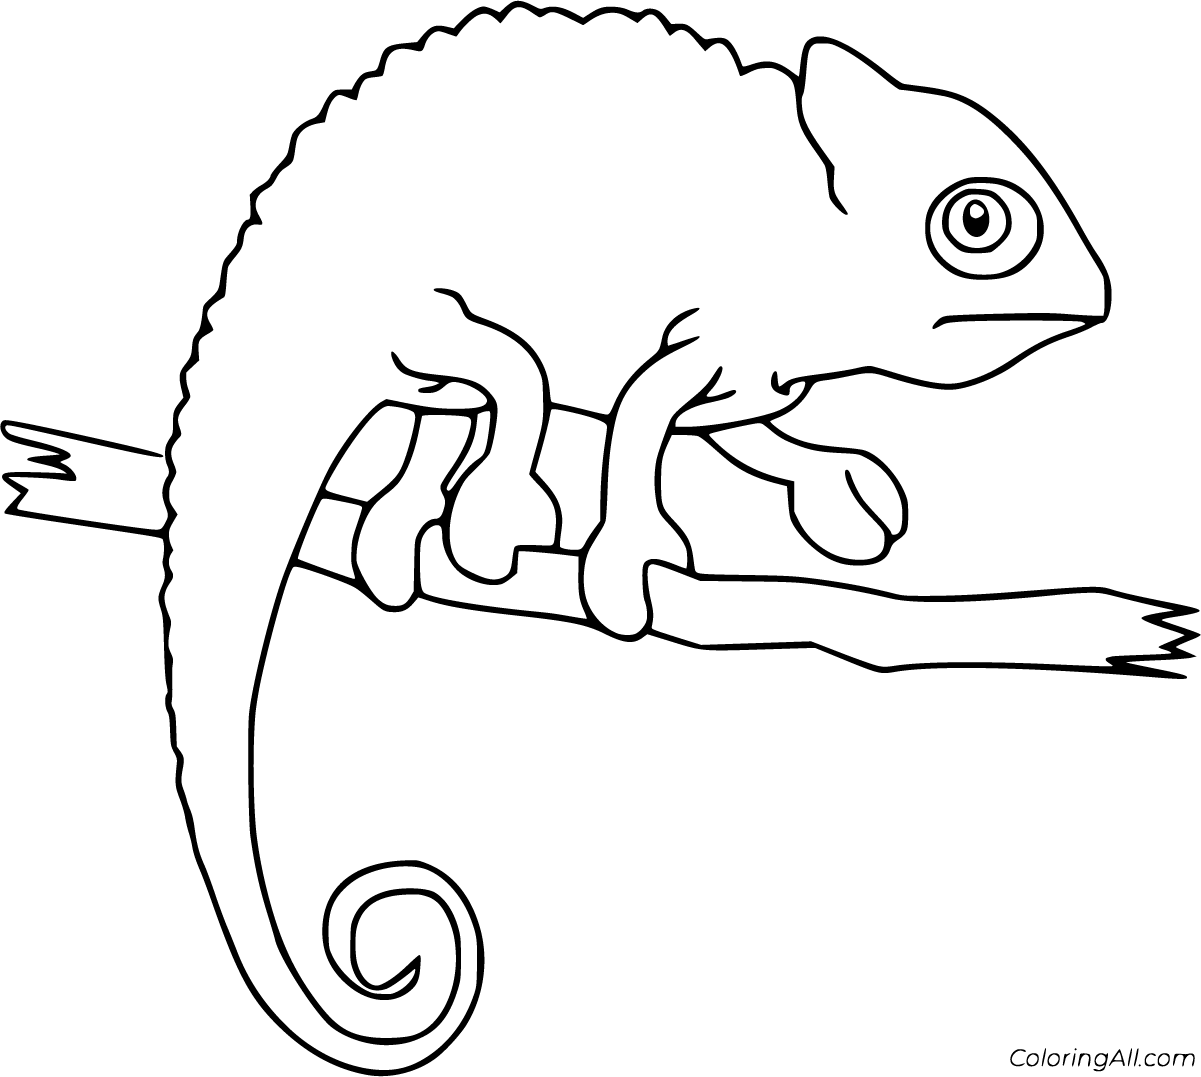 Chameleon Coloring Pages ColoringAll